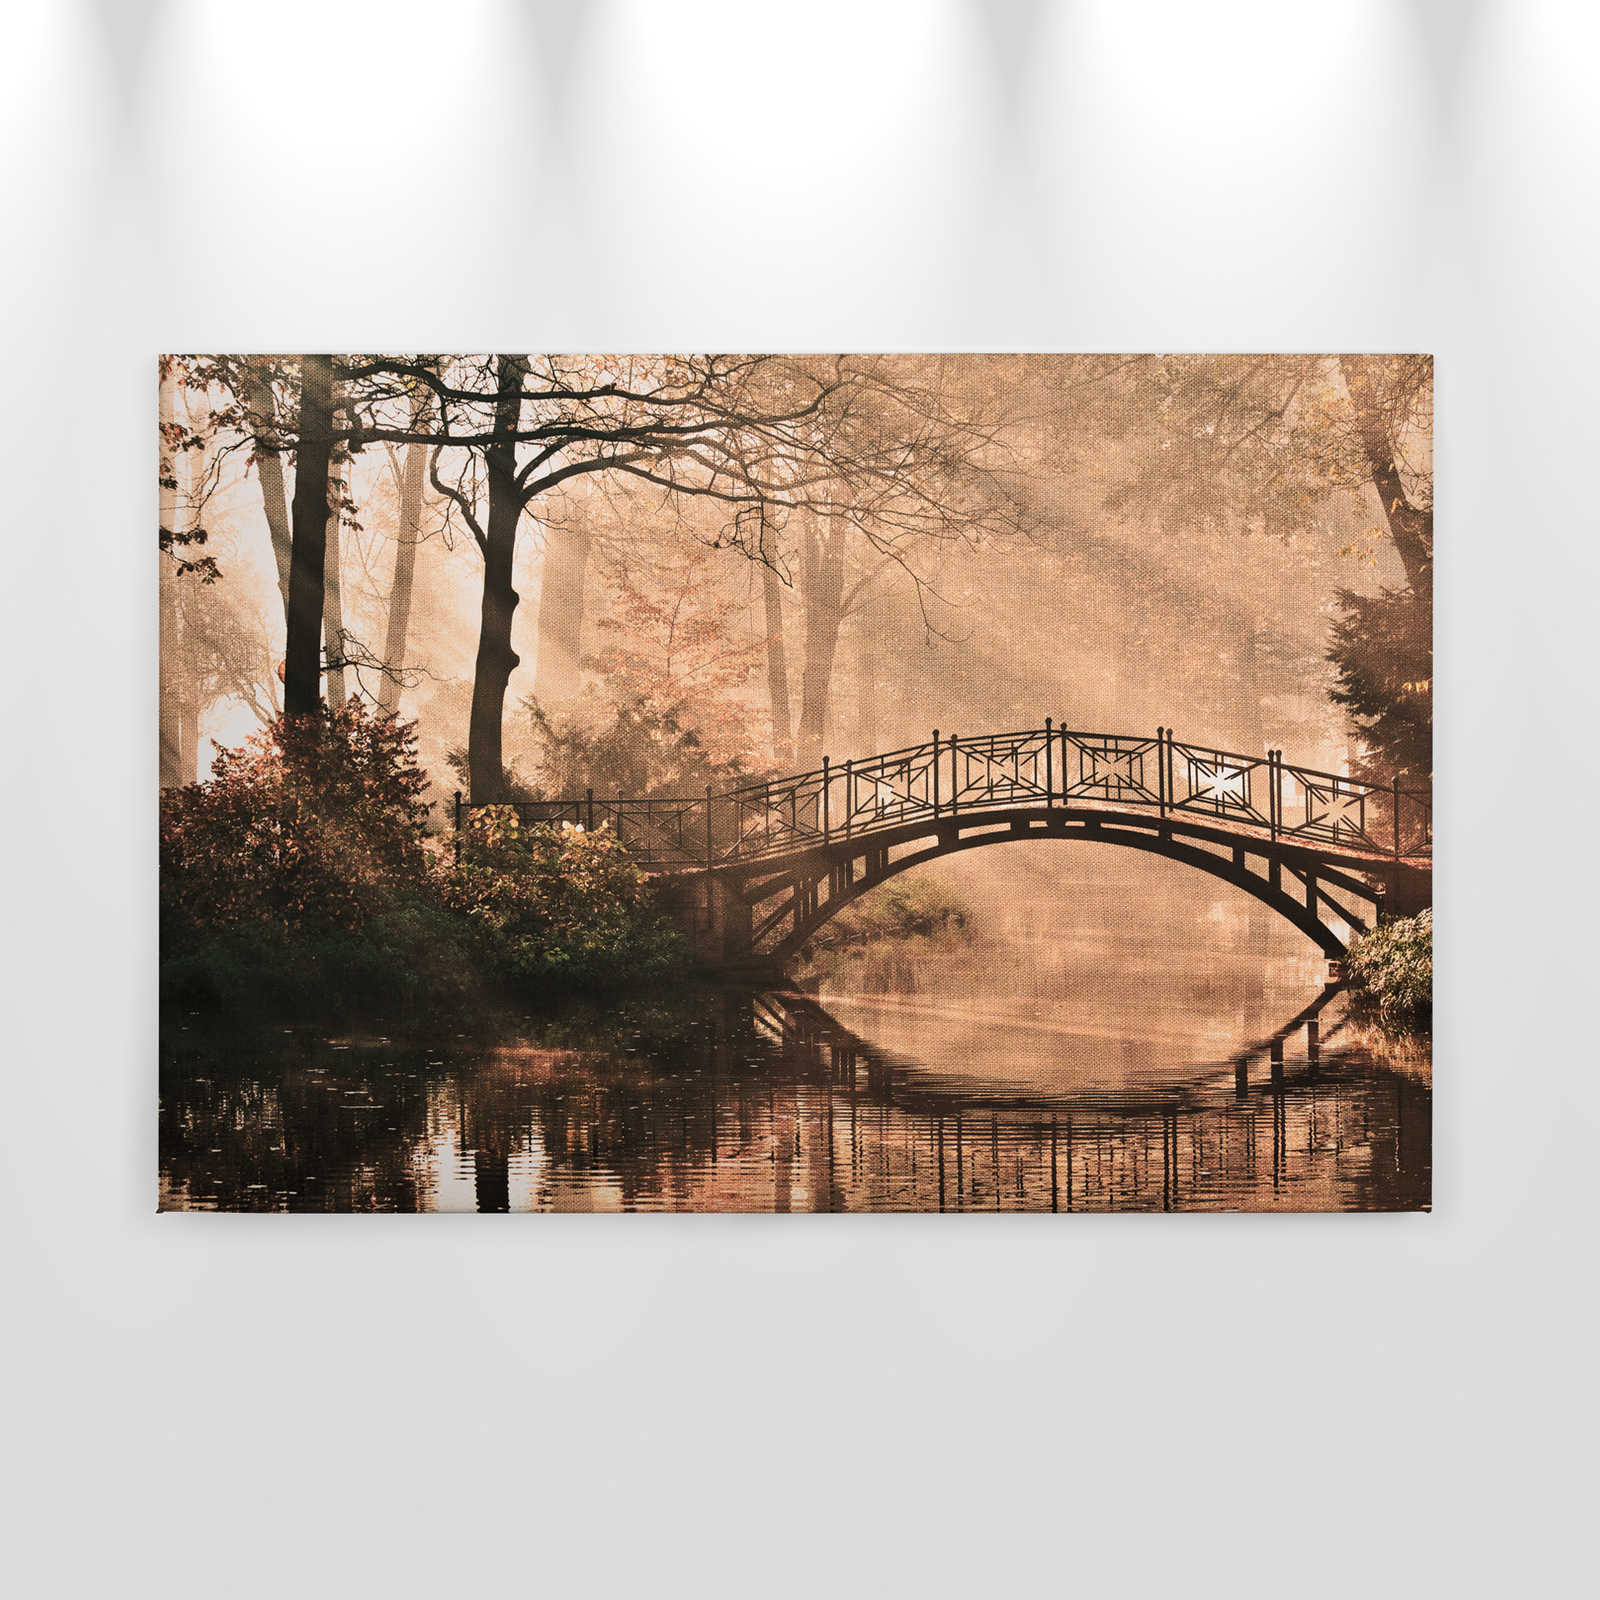             Canvas with Foliage Forest with River & Bridge - 0.90 m x 0.60 m
        